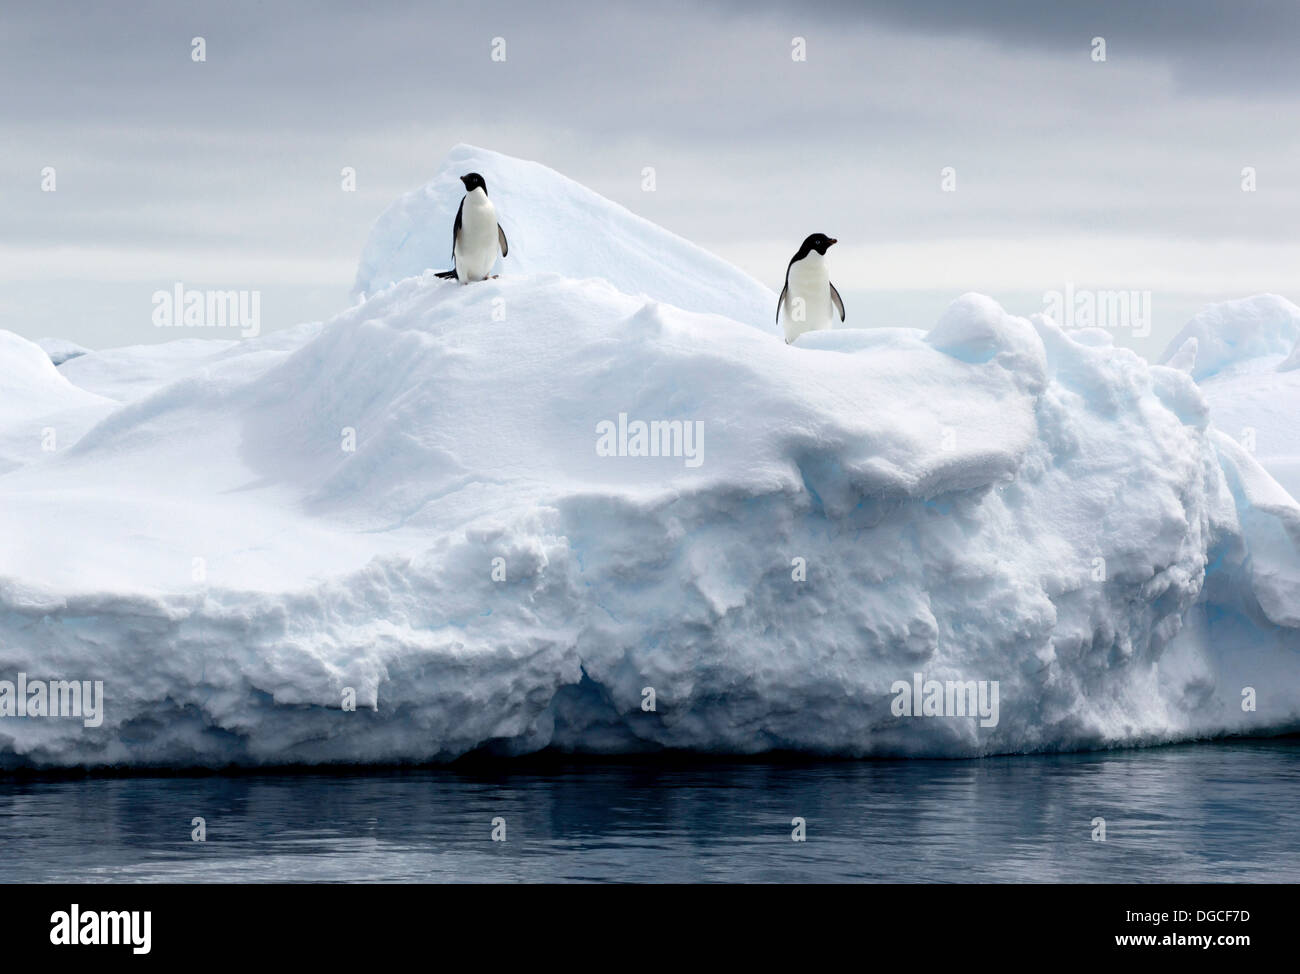 Adelie Penguins on ice floe in the southern ocean, 180 miles north of East Antarctica, Antarctica Stock Photo